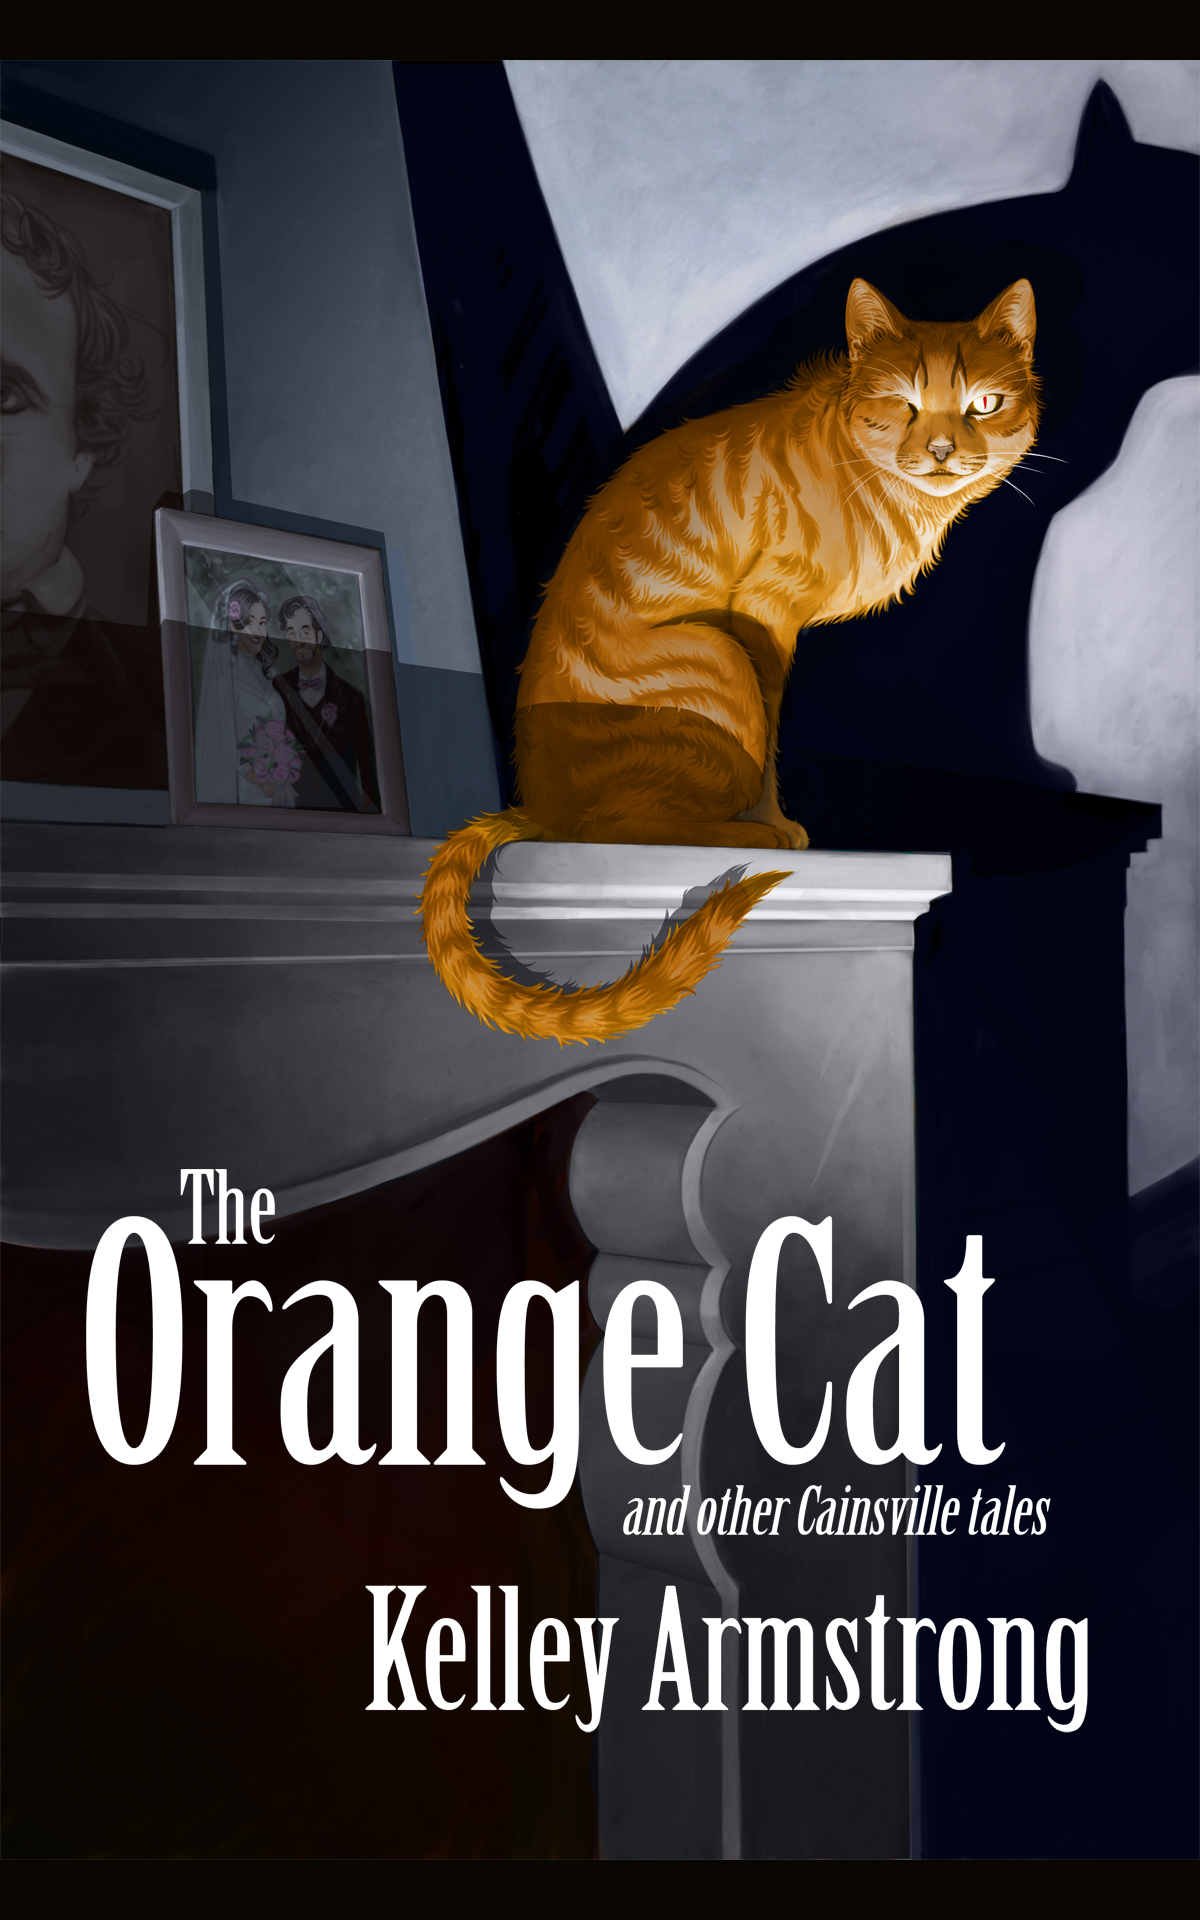 The Orange Cat & other Cainsville tales (2016) by Kelley Armstrong